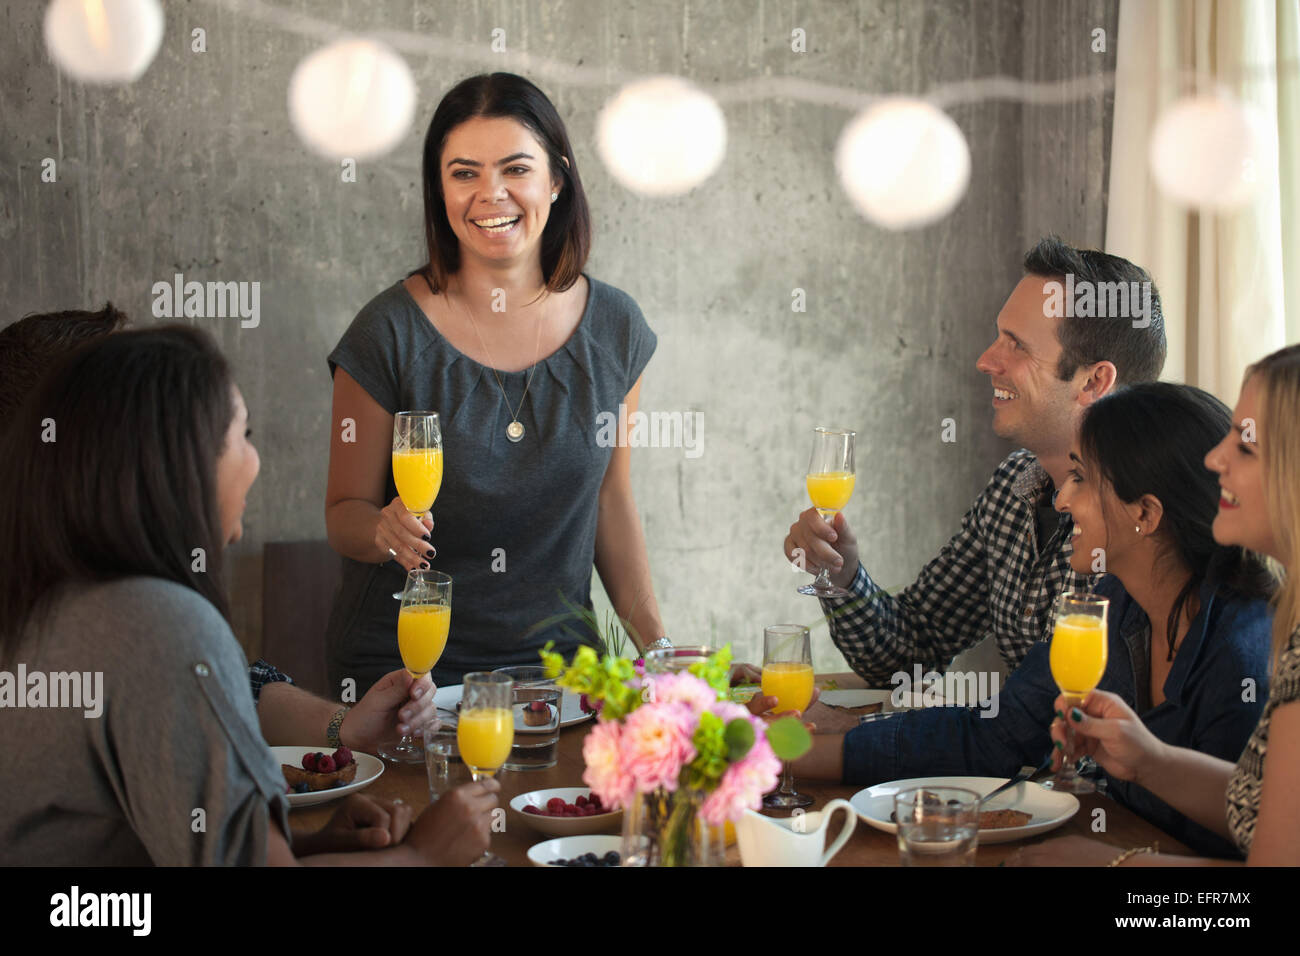 Group of friends at dinner table, young woman making toast Stock Photo